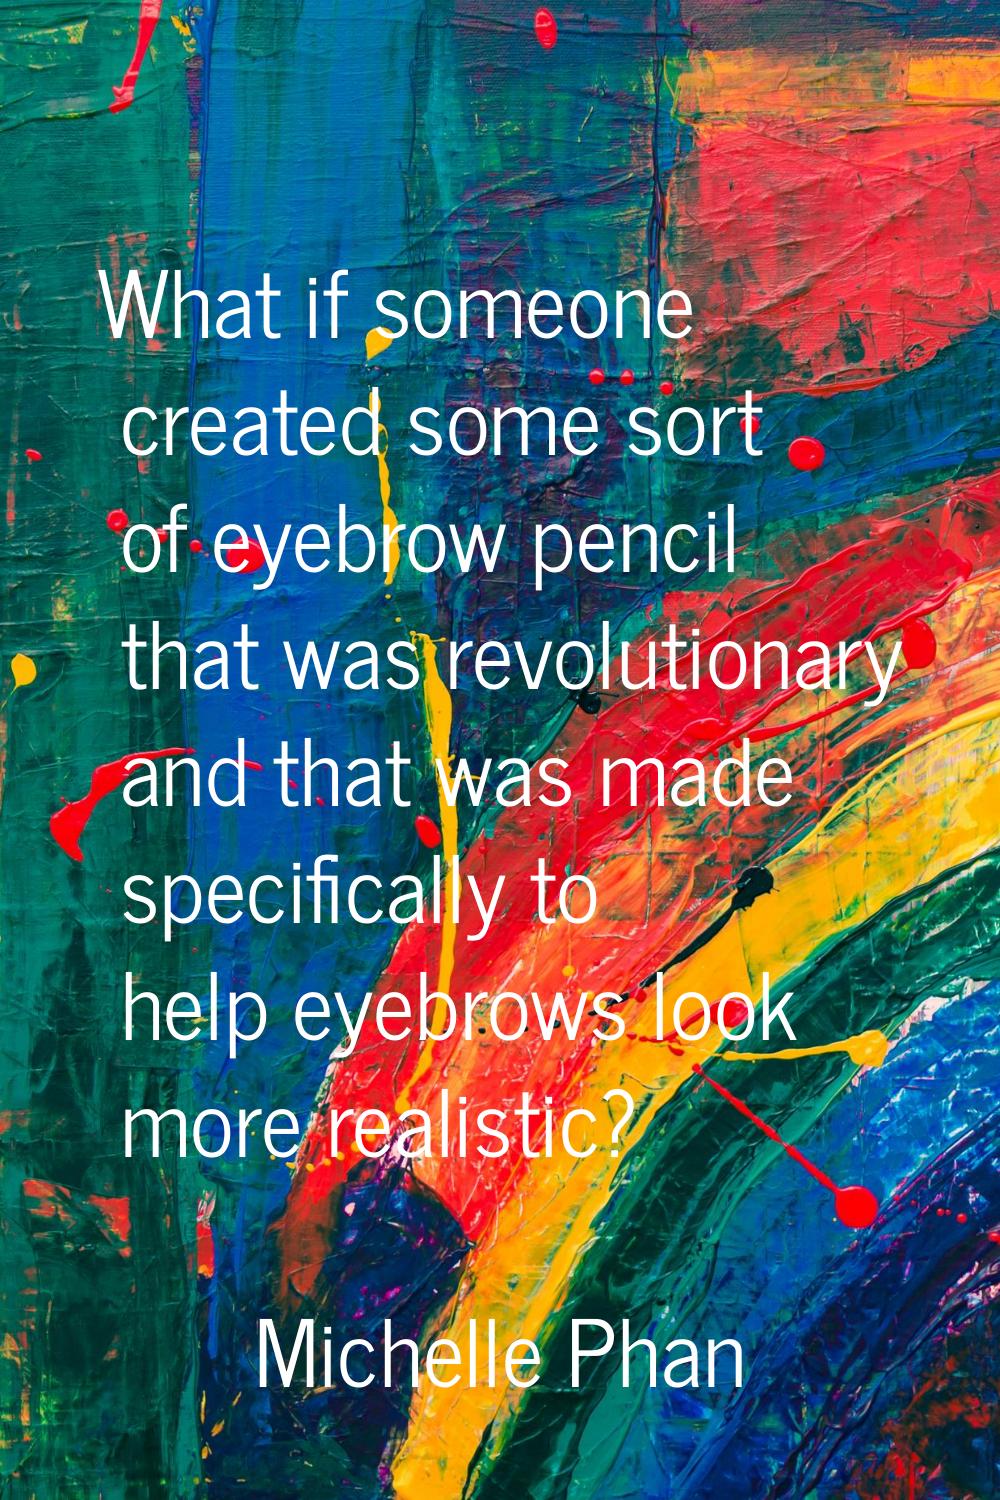 What if someone created some sort of eyebrow pencil that was revolutionary and that was made specif